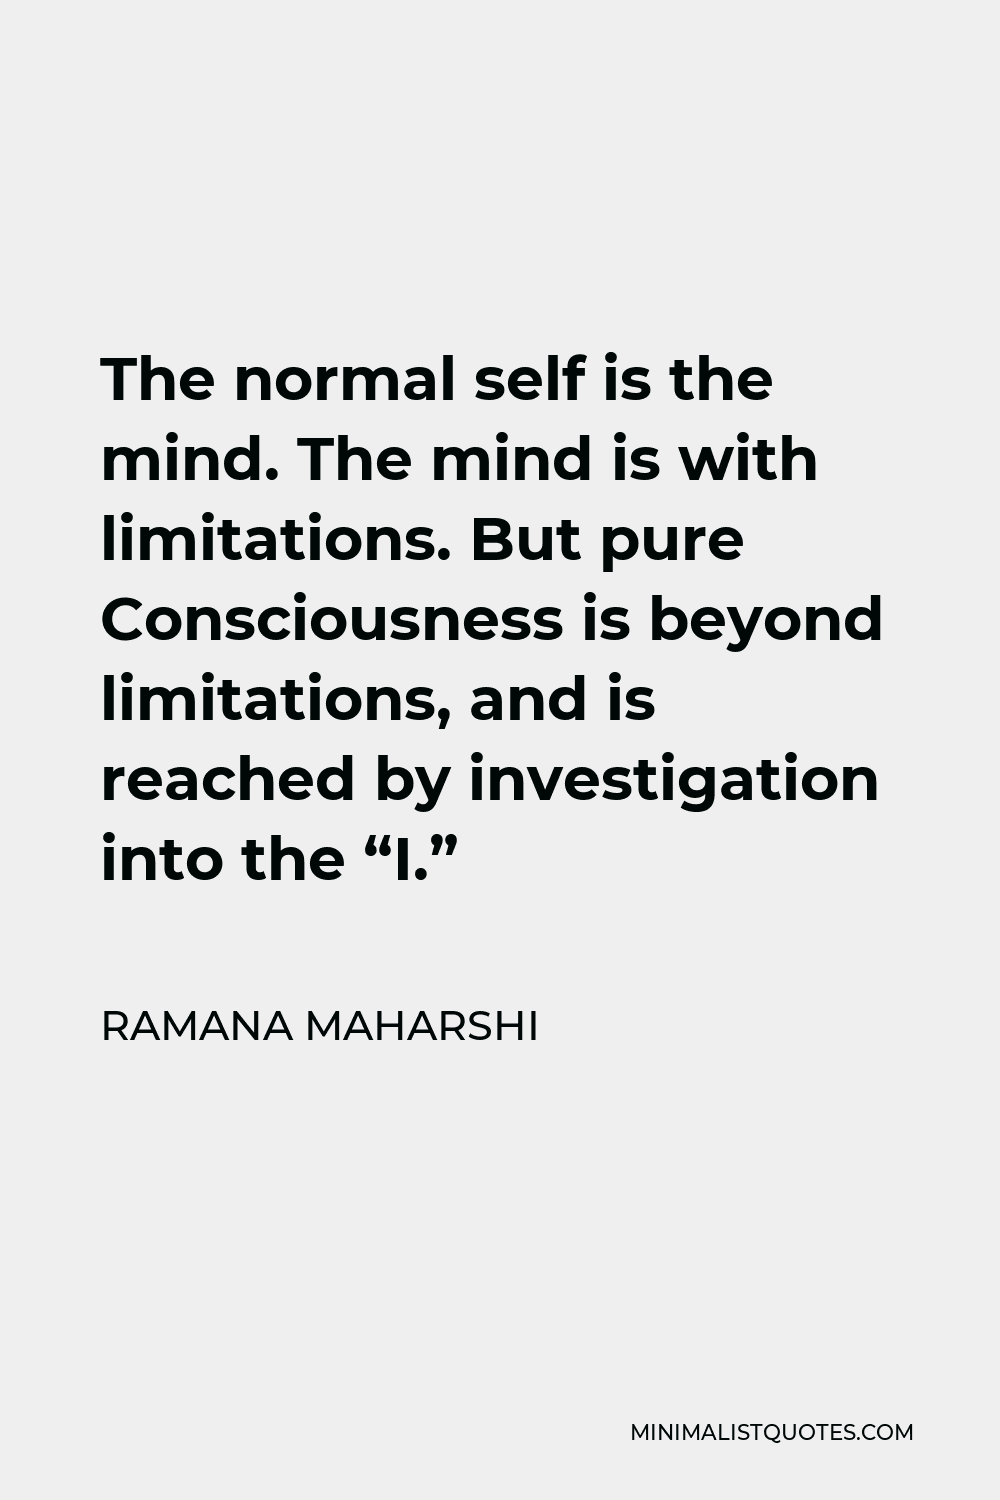 Ramana Maharshi Quote - The normal self is the mind. The mind is with limitations. But pure Consciousness is beyond limitations, and is reached by investigation into the “I.”